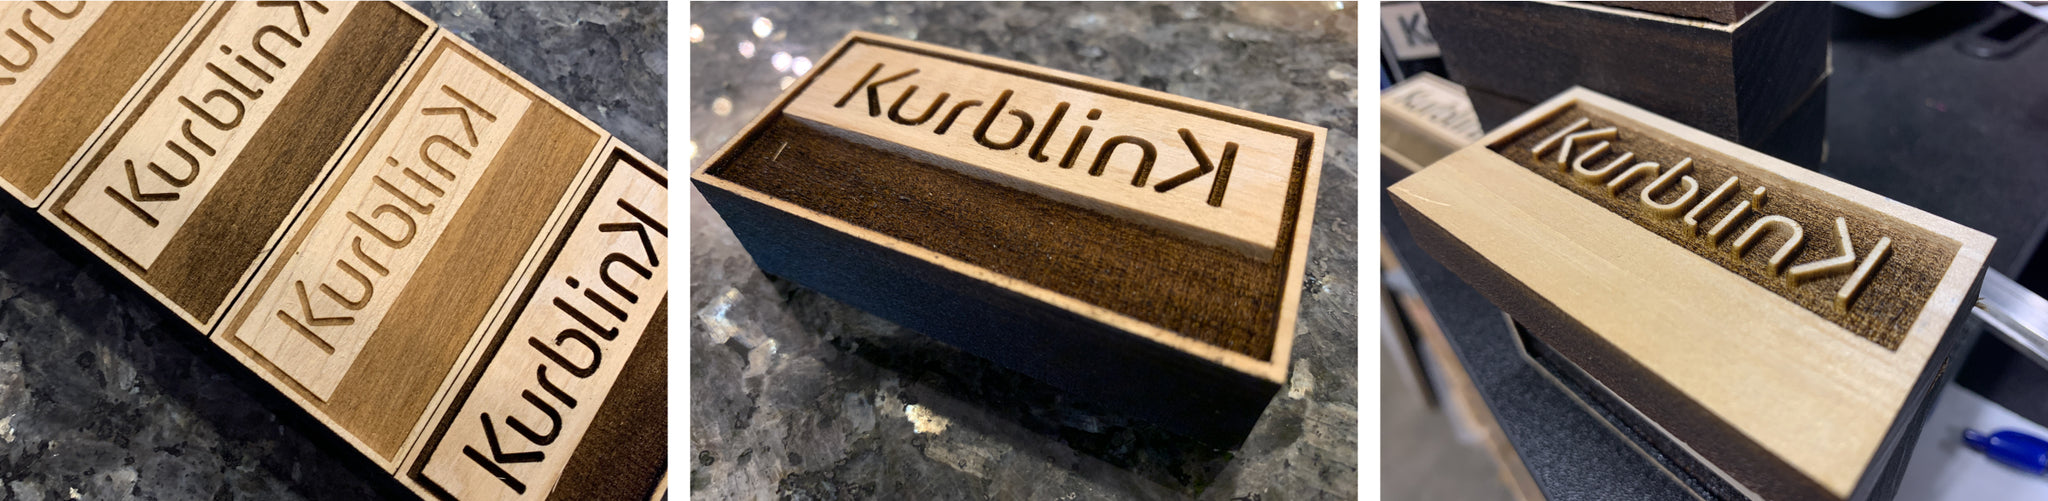 wood laser cut and engraved by Kurblink